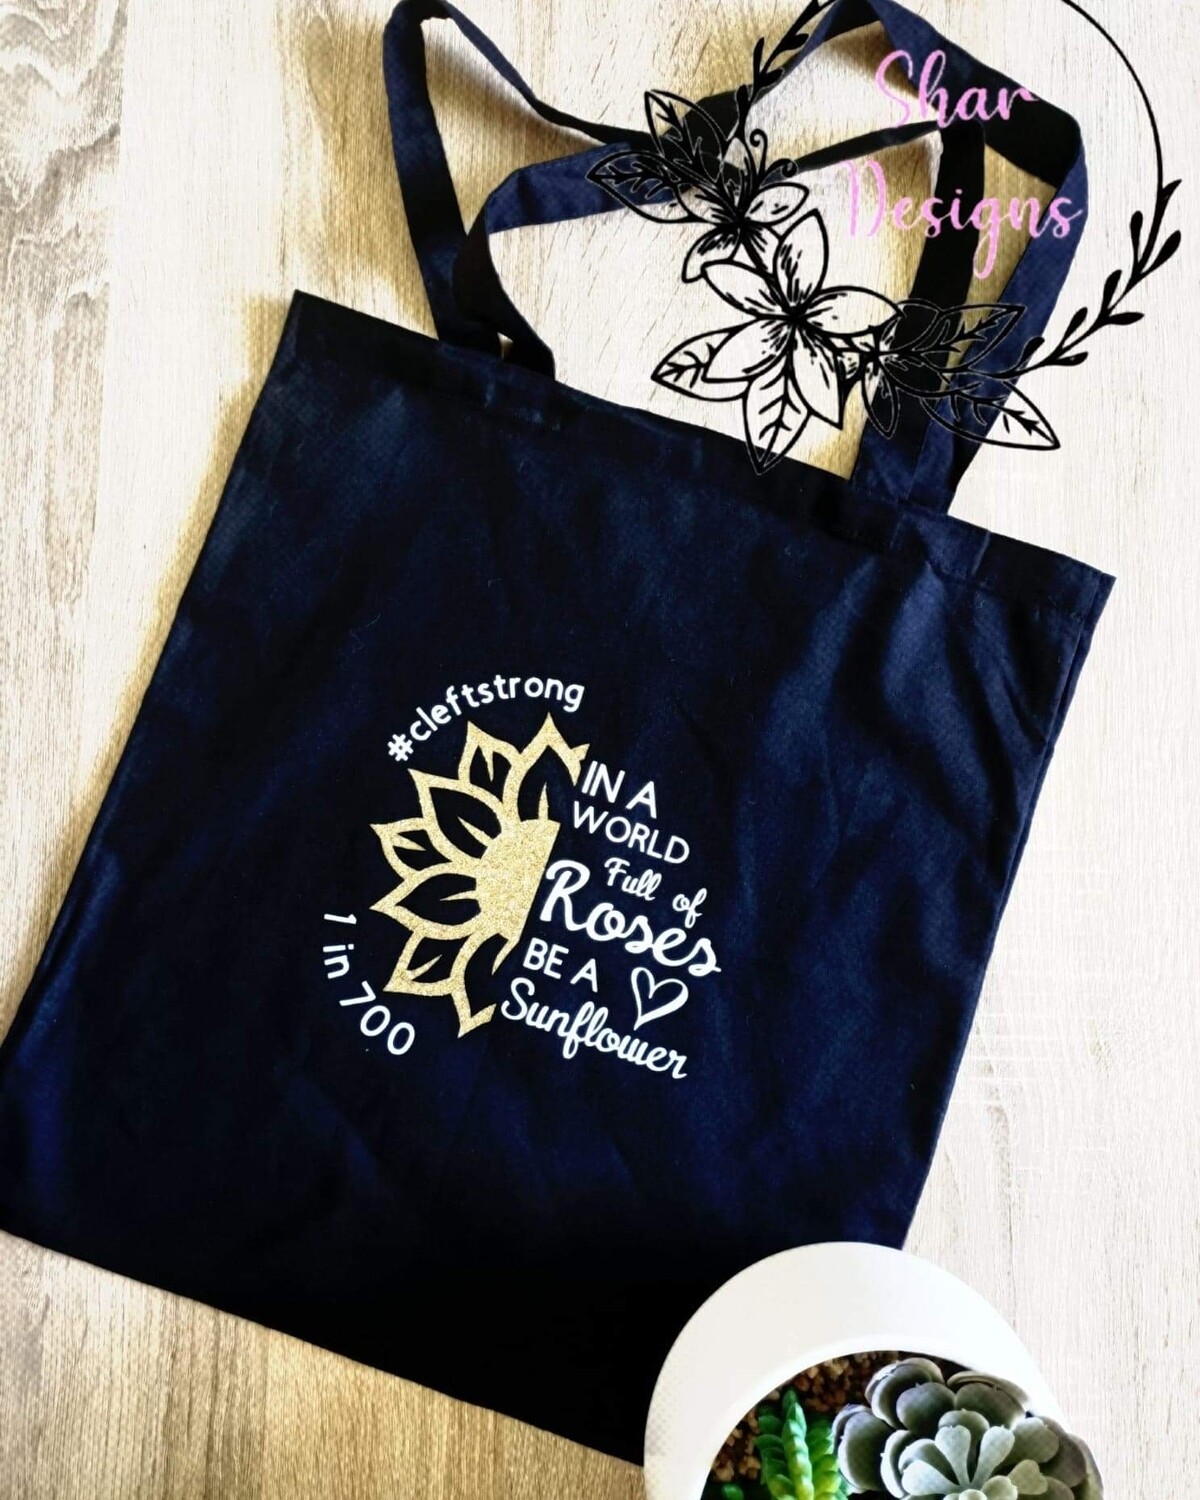 Cleft tote bags